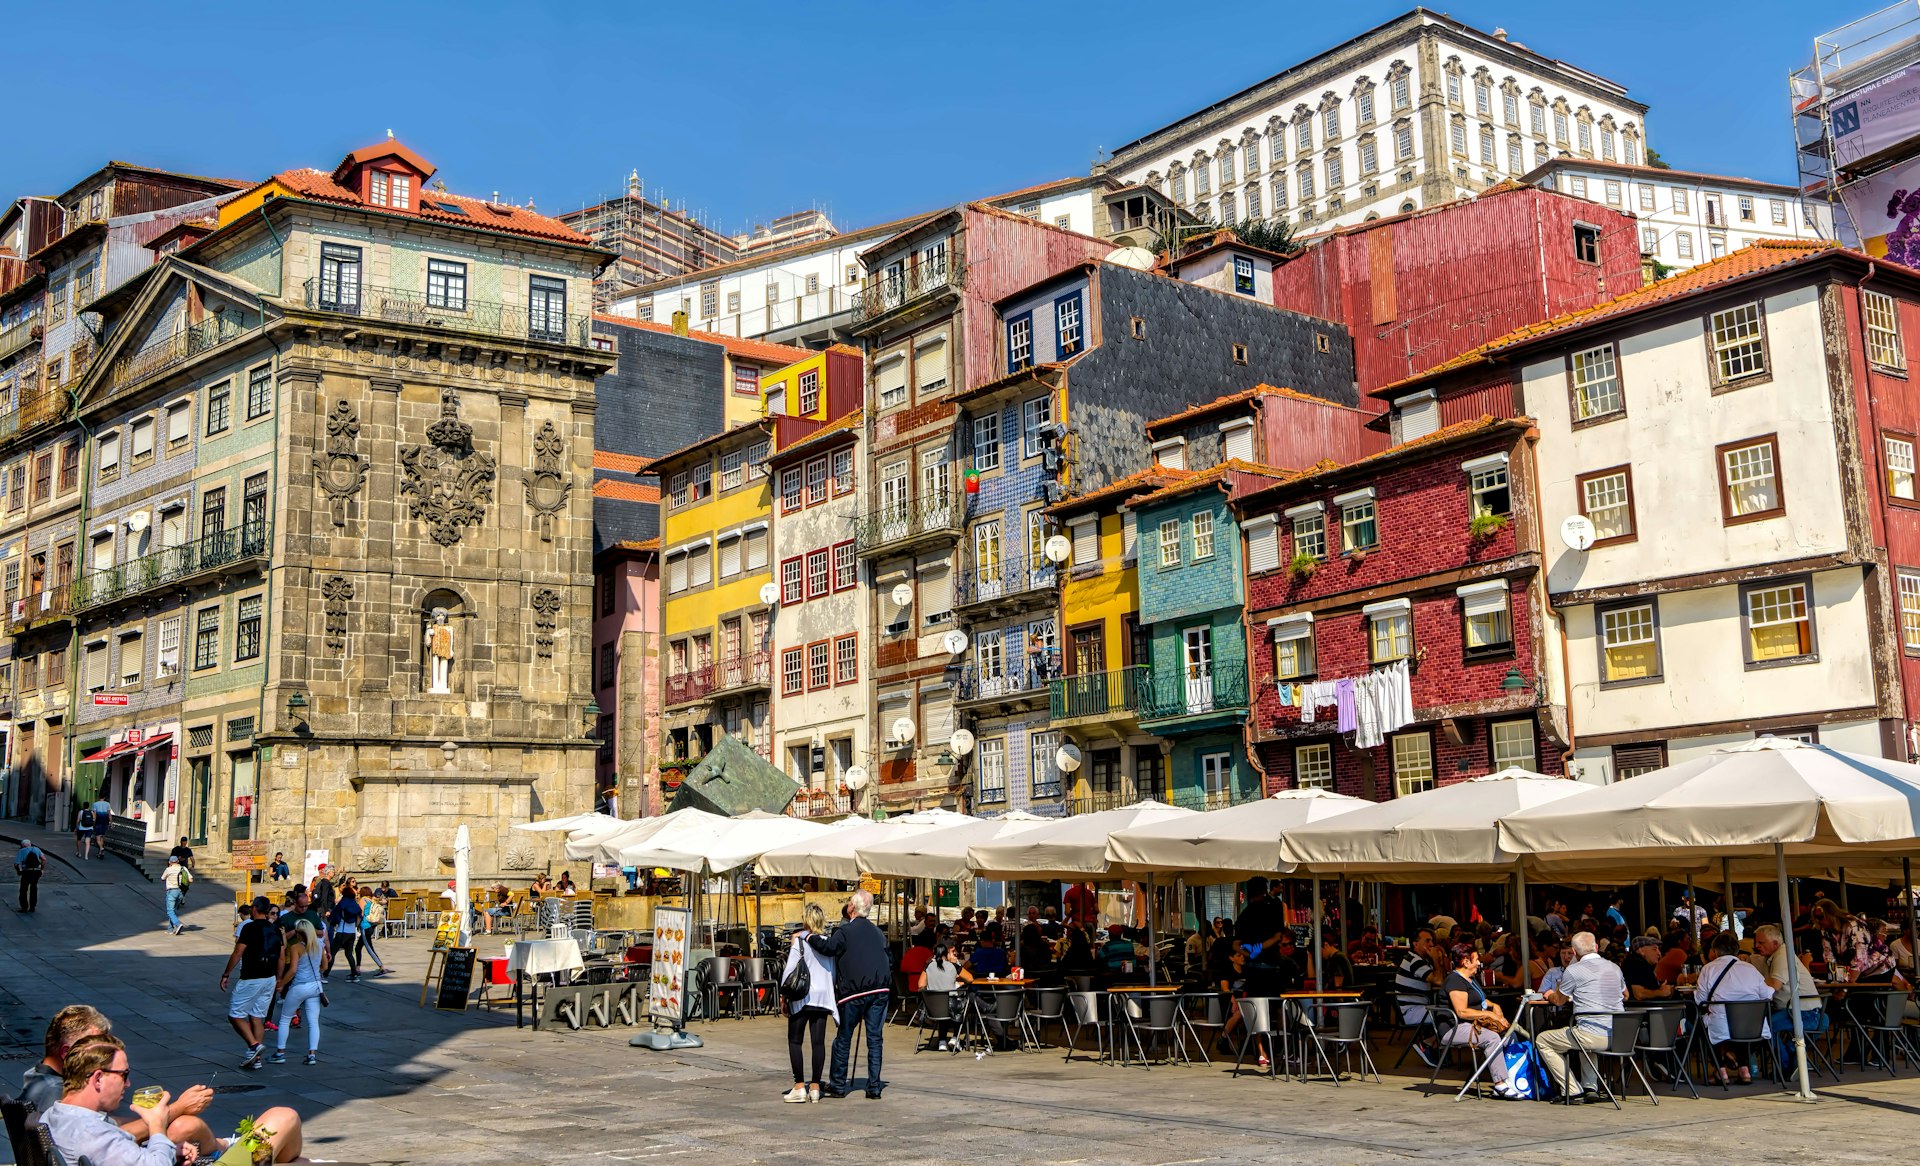 People walking and sitting at sidewalk tables in the Ribeira neighborhood, with a backdrop of tall, colorful buildings